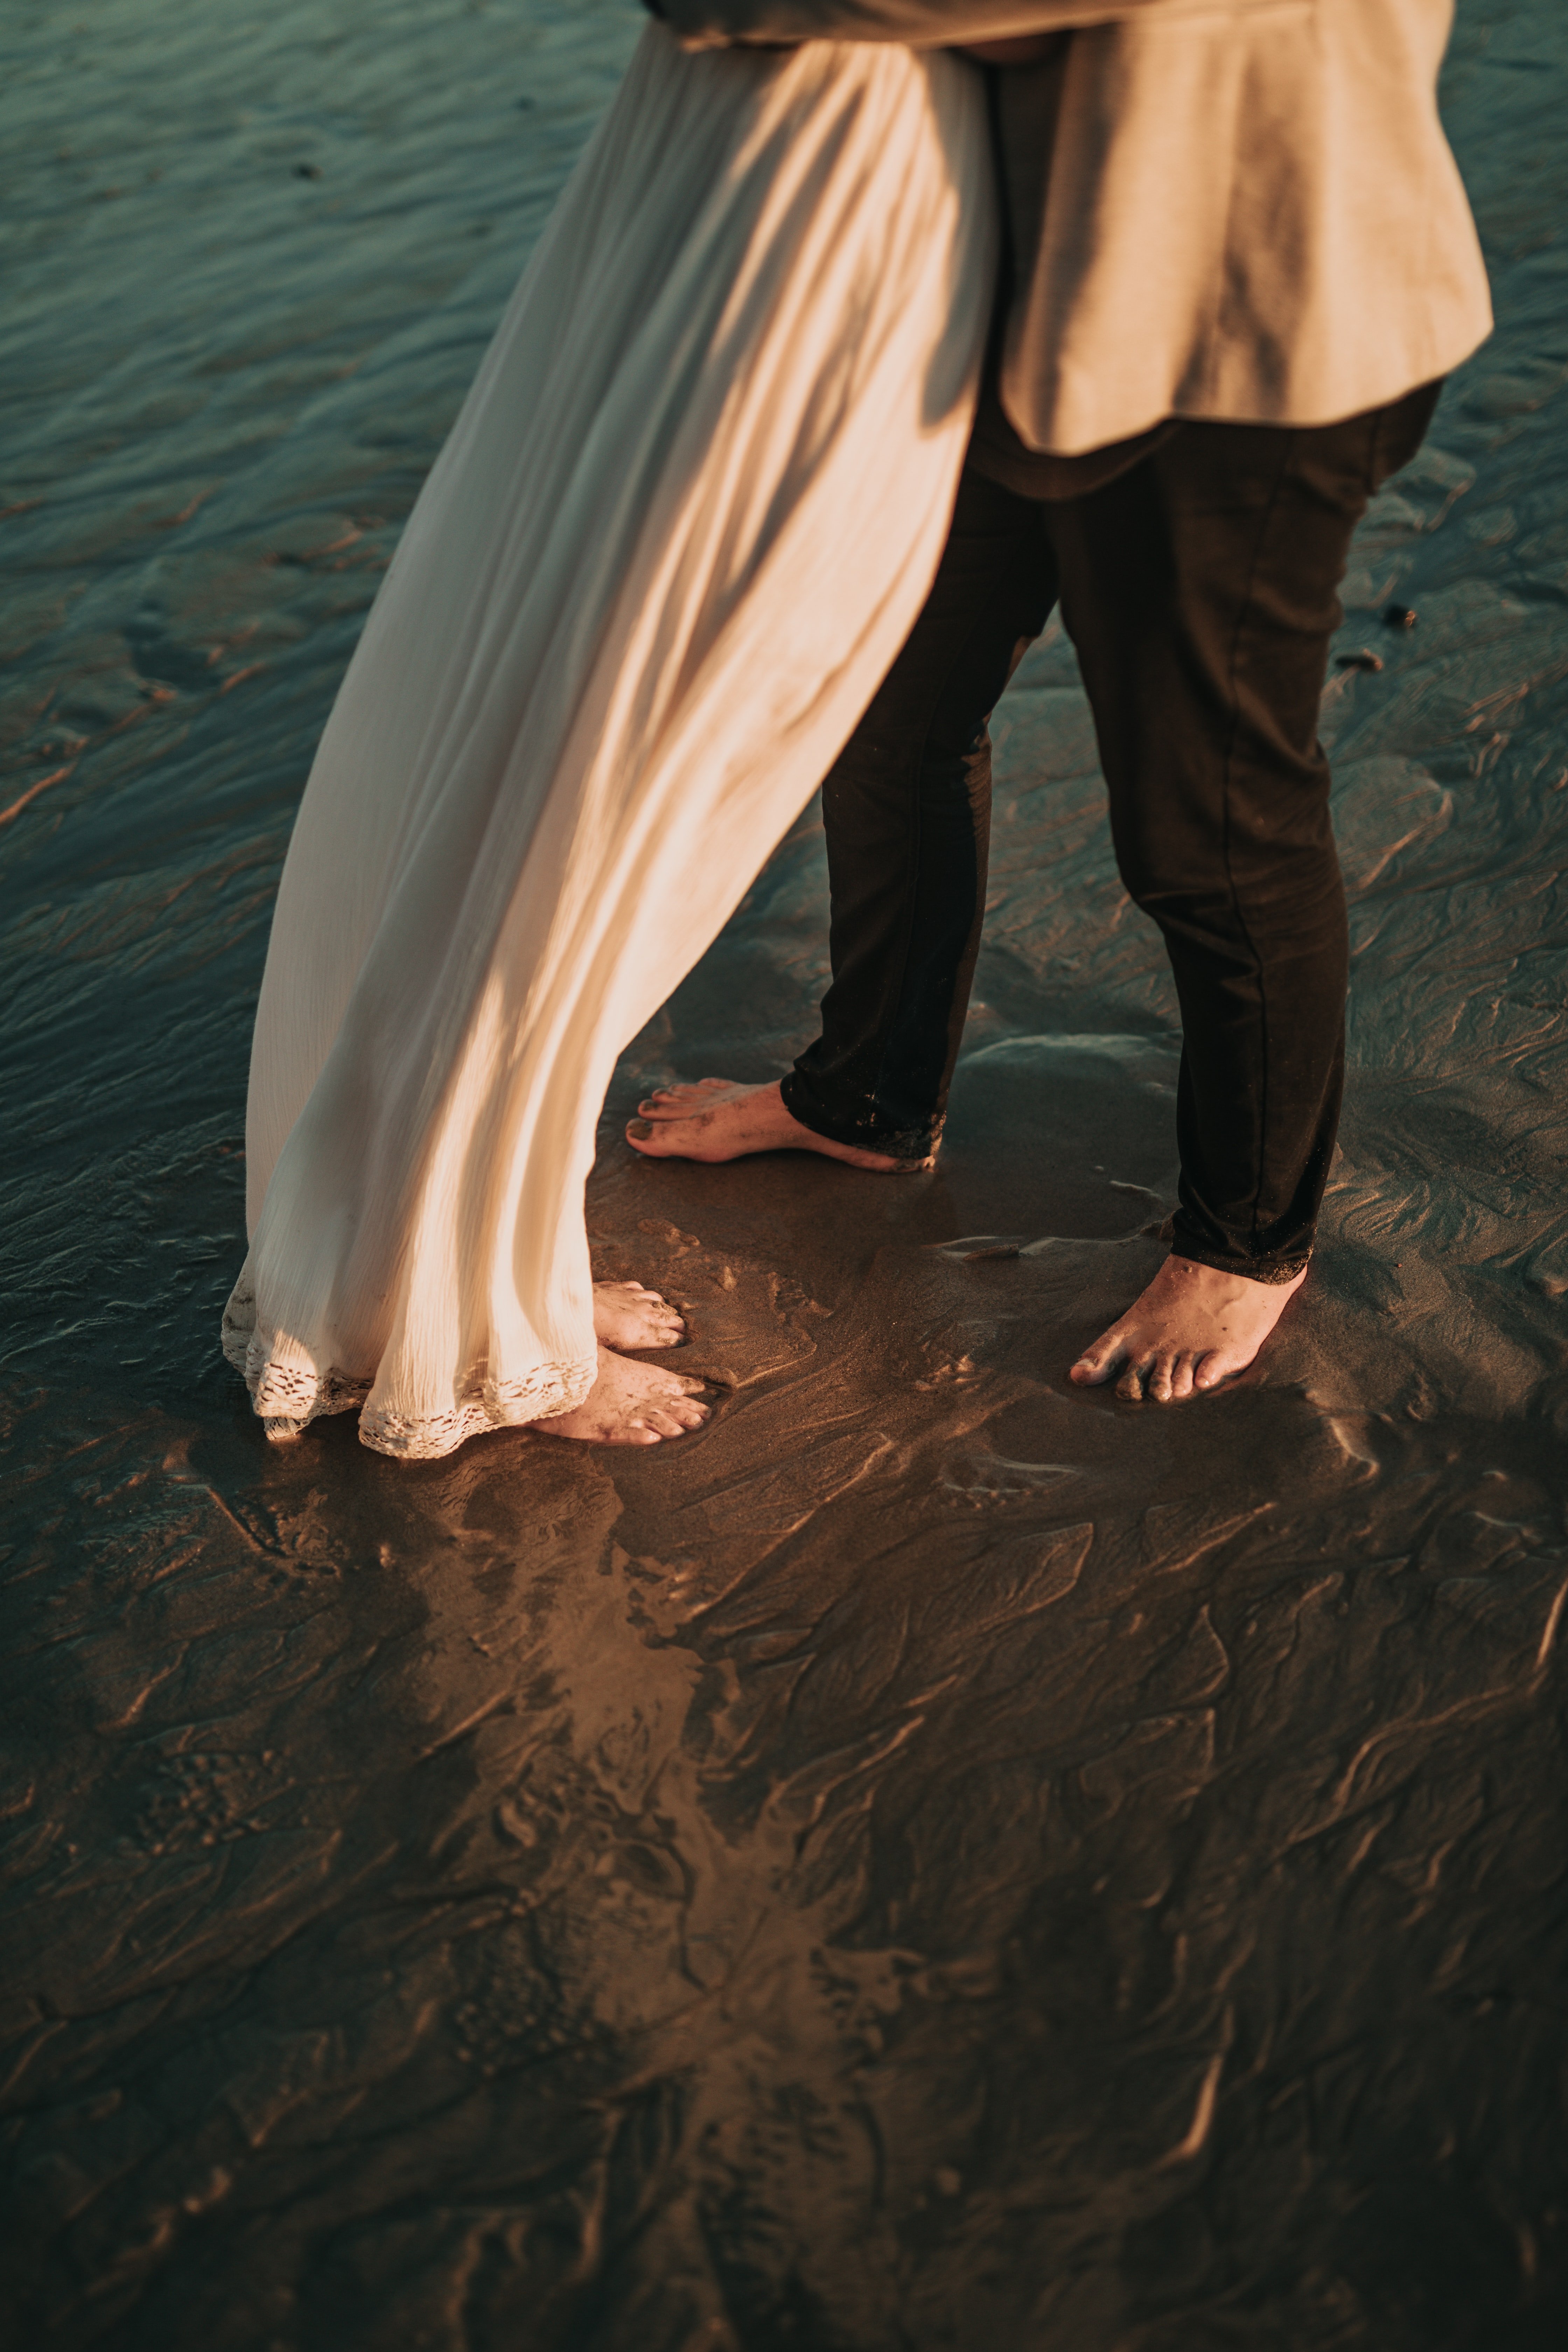 David and Claire married three weeks after they met. | Source: Unsplash